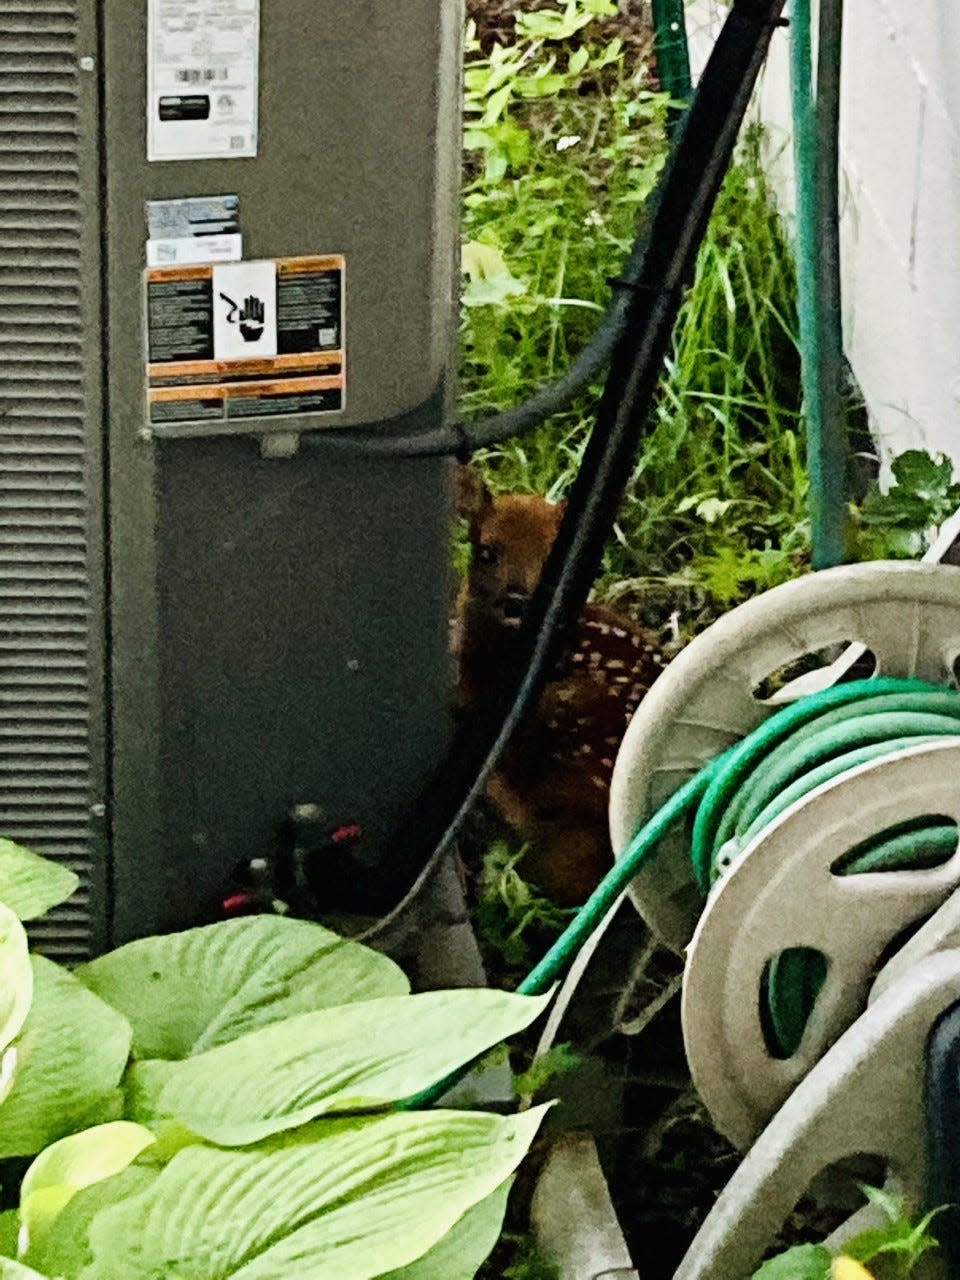 The fawn eventually moved from the front yard of Dispatch Metro columnist Theodore Decker's home on Sunday to a spot behind the home's central air conditioning unit.